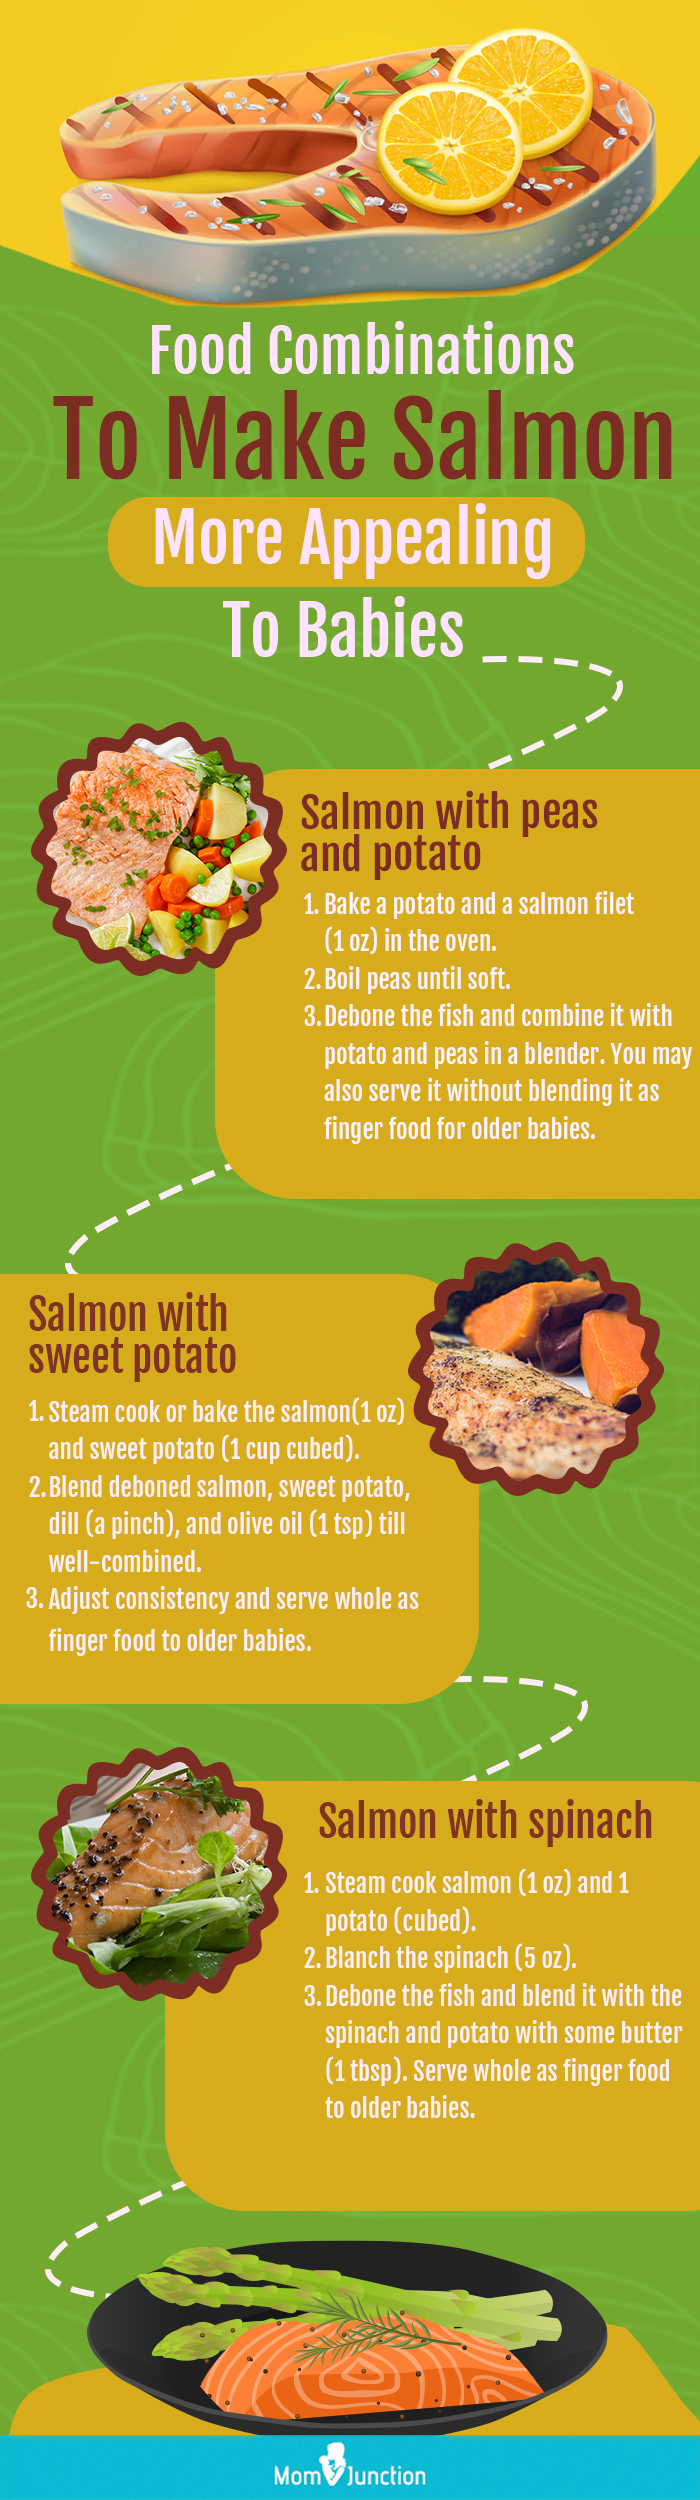 food combinations to make salmon more appealing to babies [infographic]